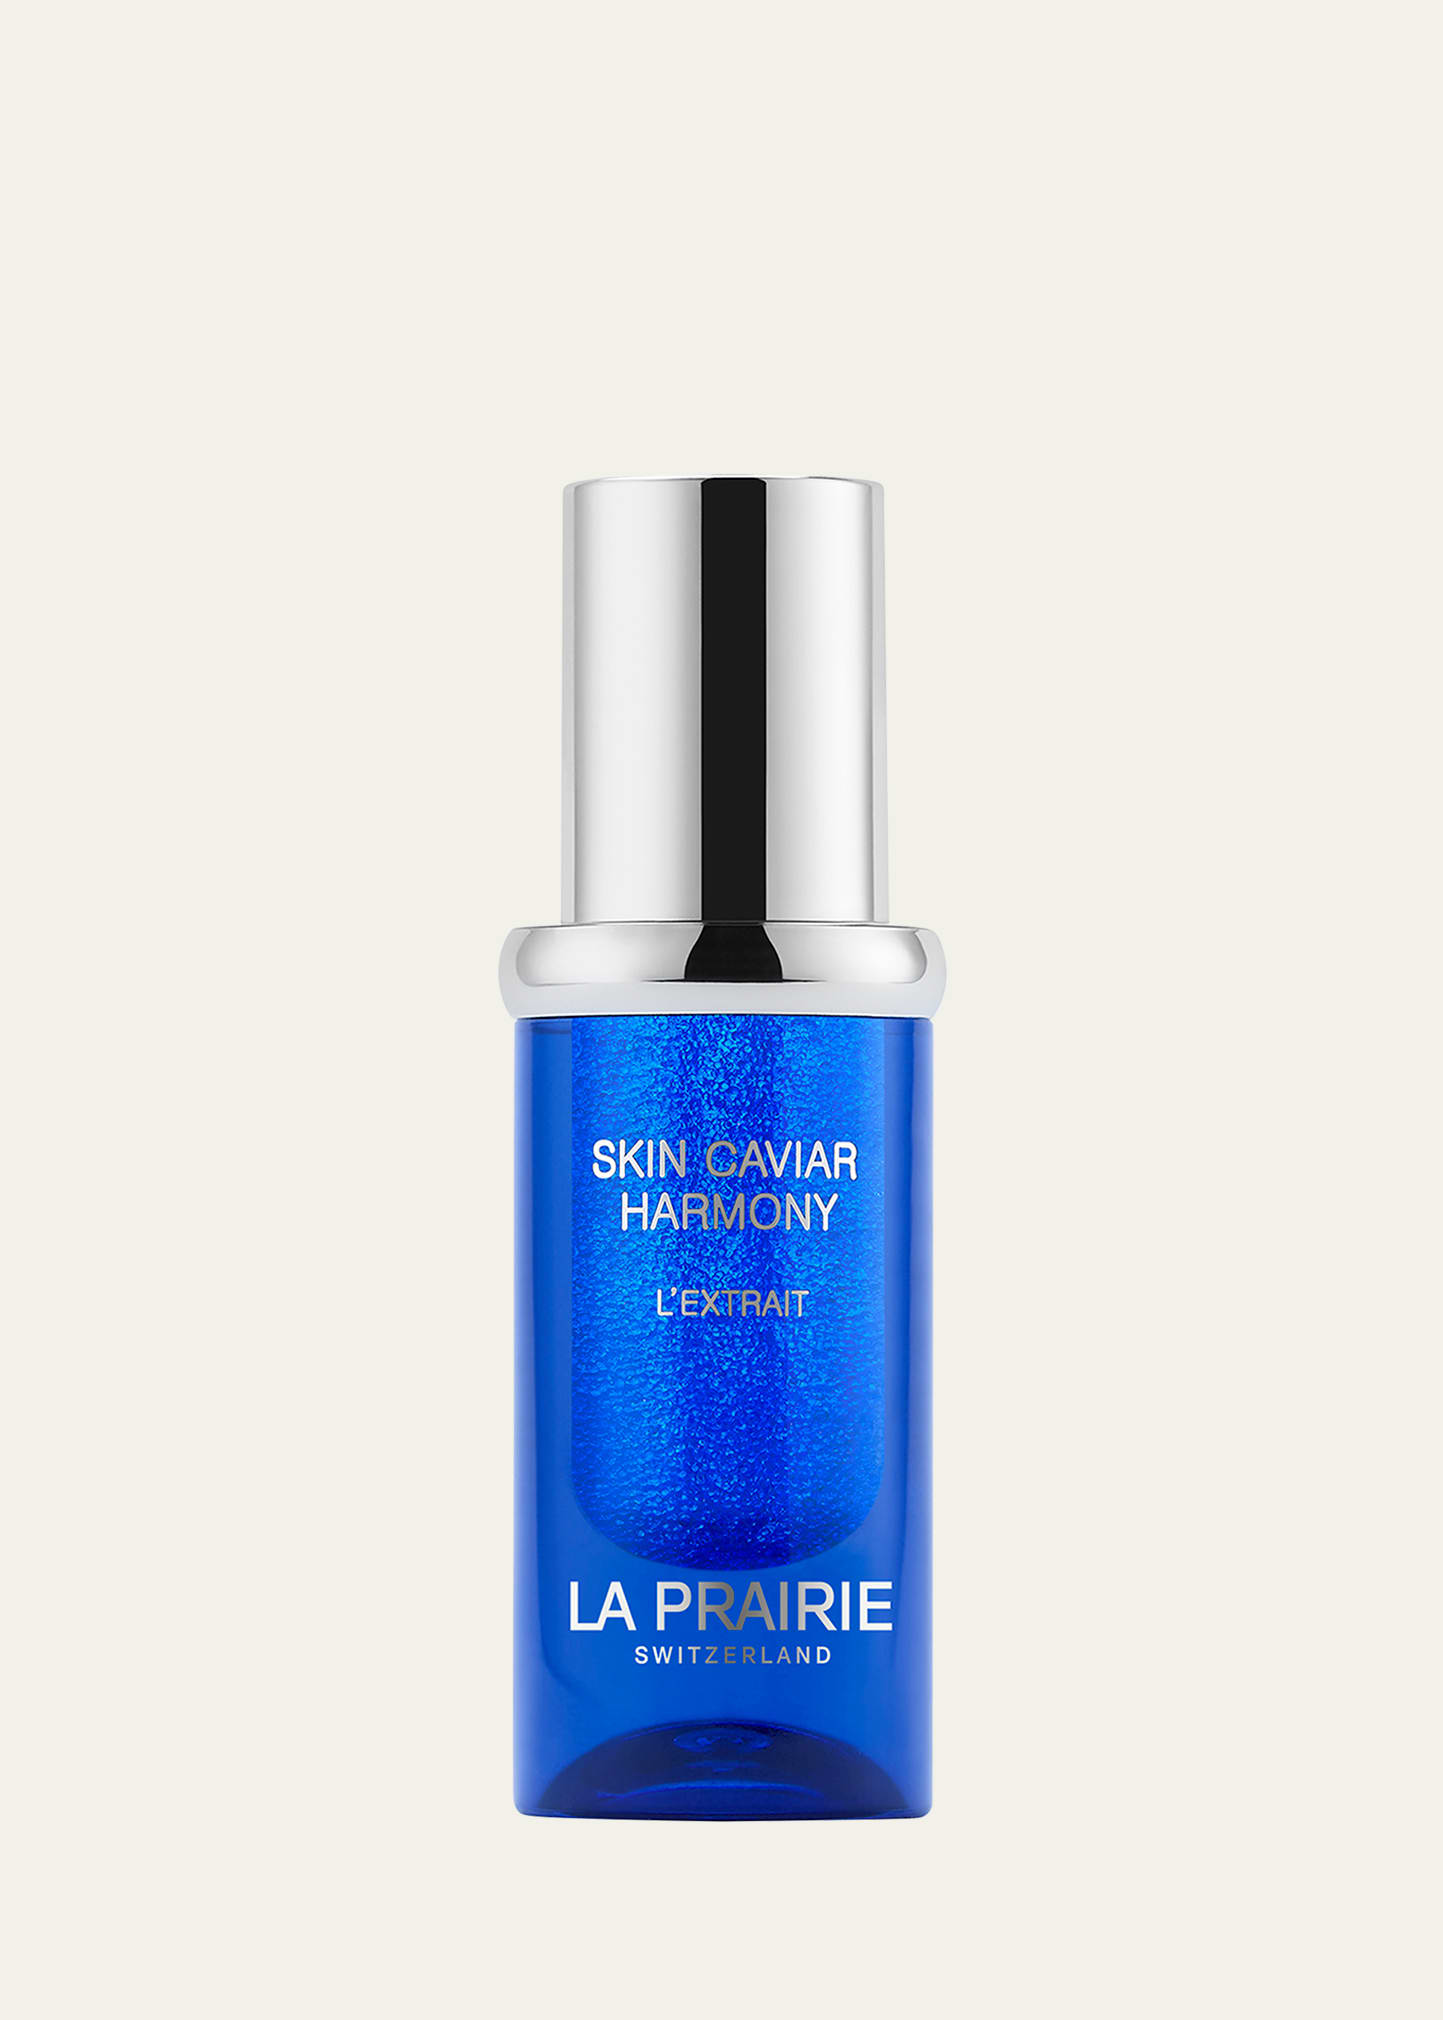 Skin Caviar Harmony L'Extrait, 3 mL, Yours with any $300 or more La Prairie Purchase ($200 value)